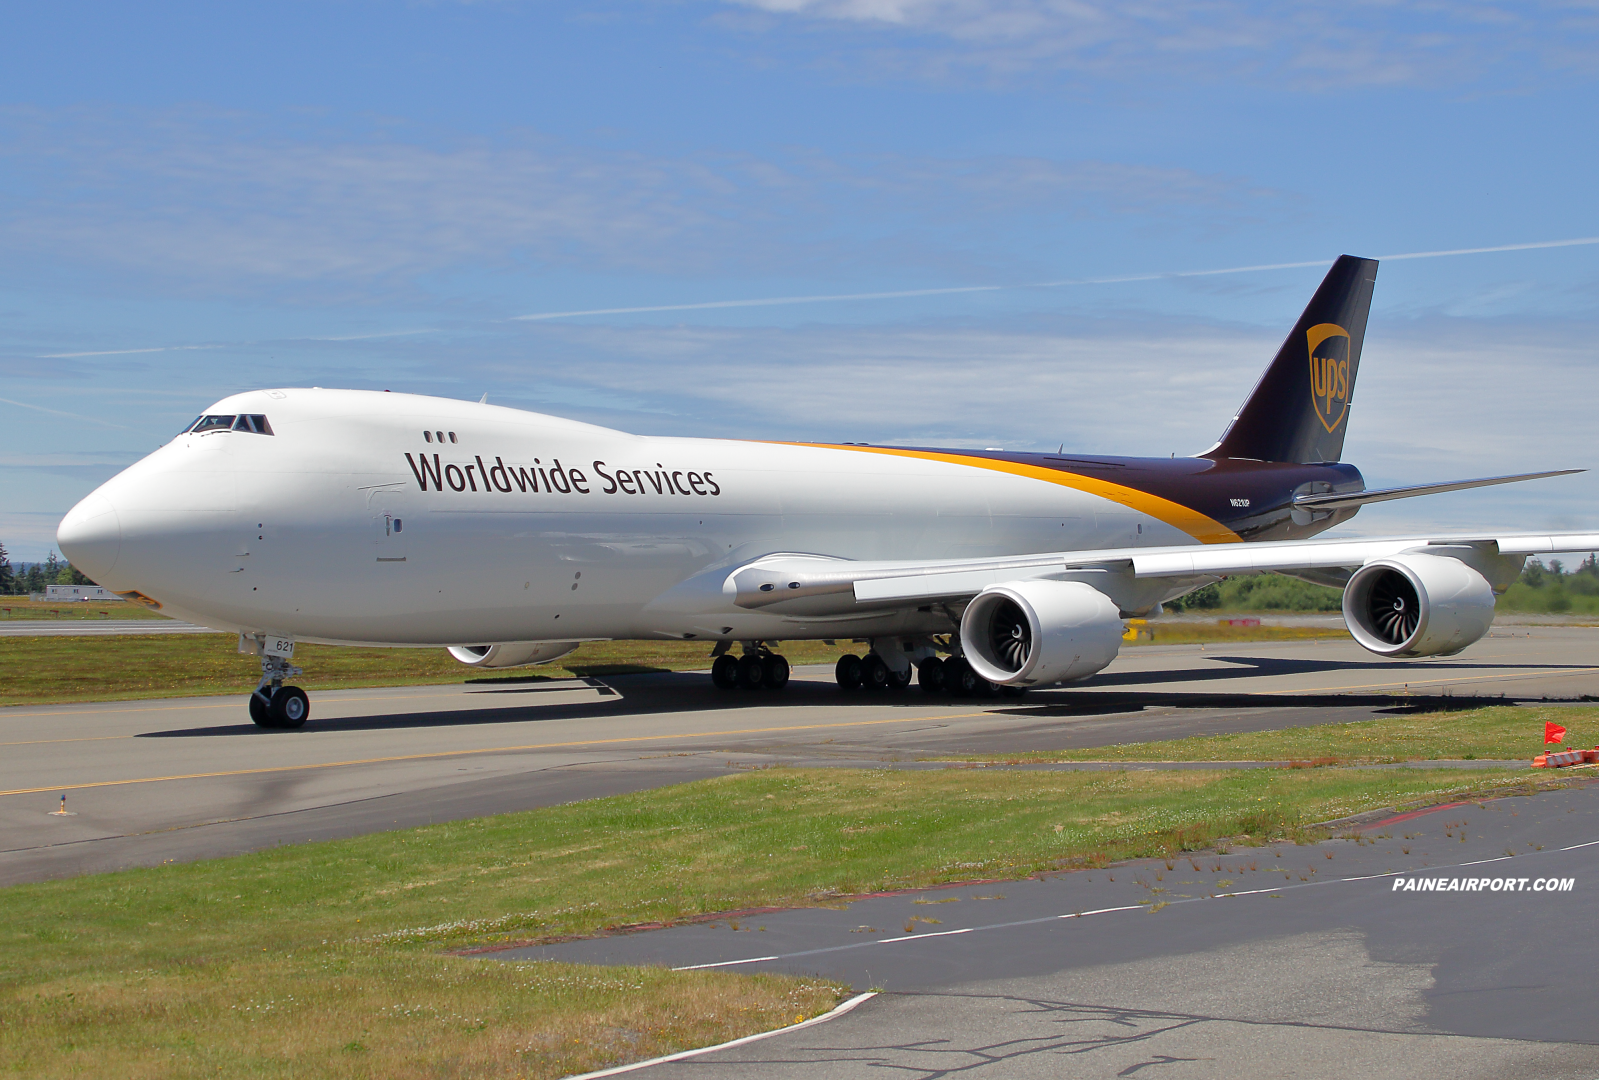 UPS 747-8F N621UP at KPAE Paine Field